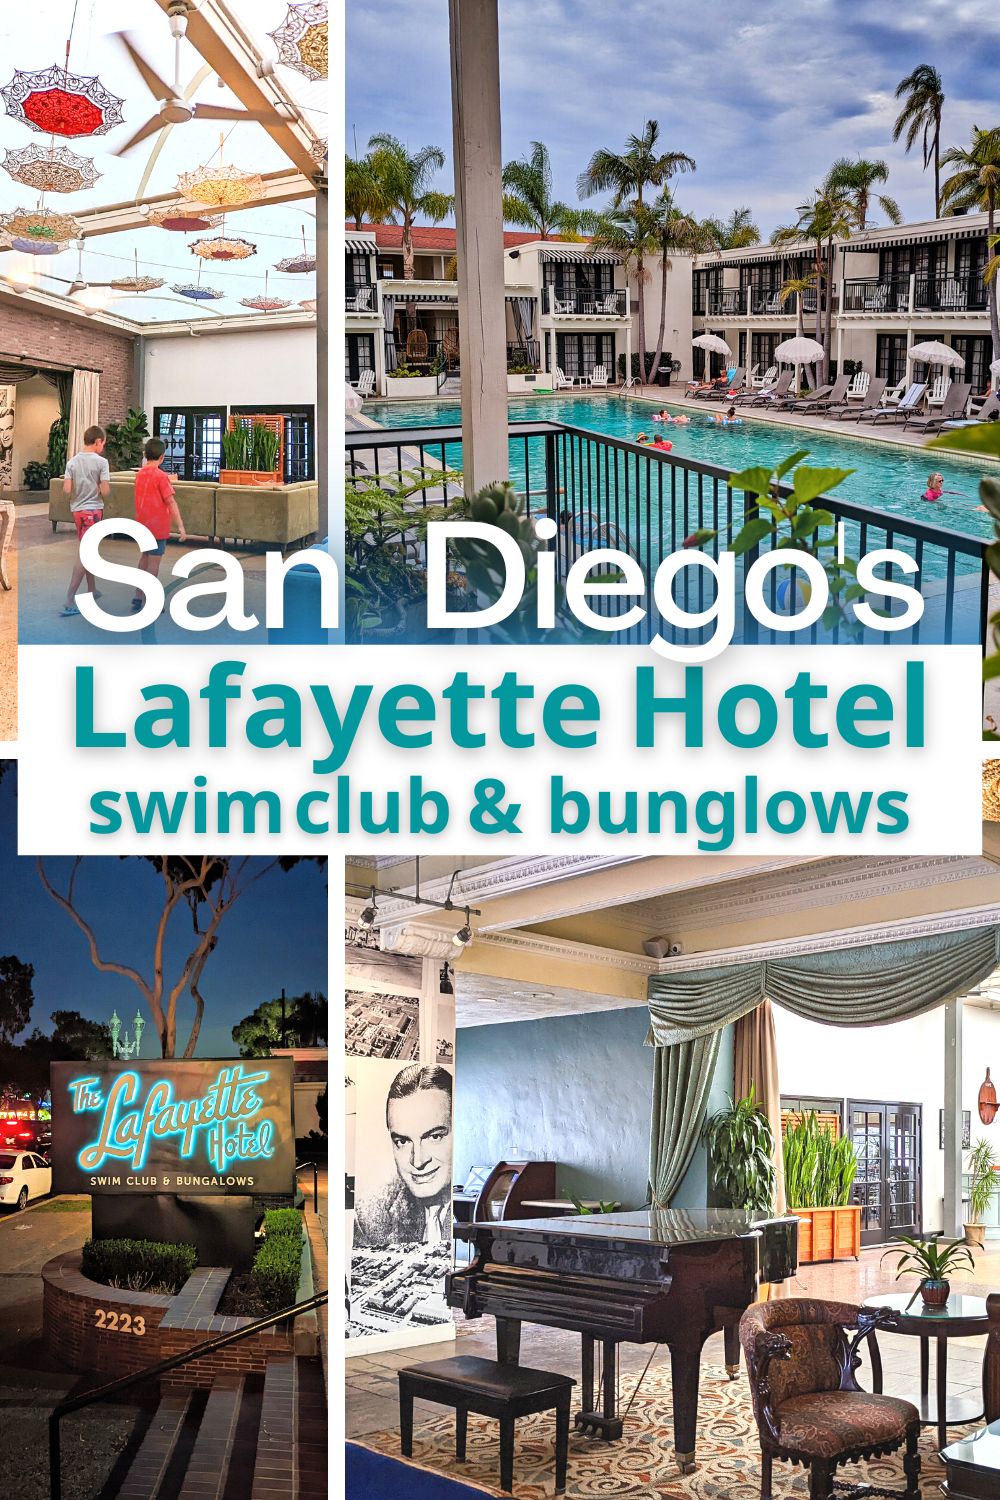 San Diego's Lafayette Hotel, Swim Club and Bungalows is a great vintage stay close to Balboa Park. See what to expect from this old Hollywood destination hotel, one of the most fun places in San Diego.